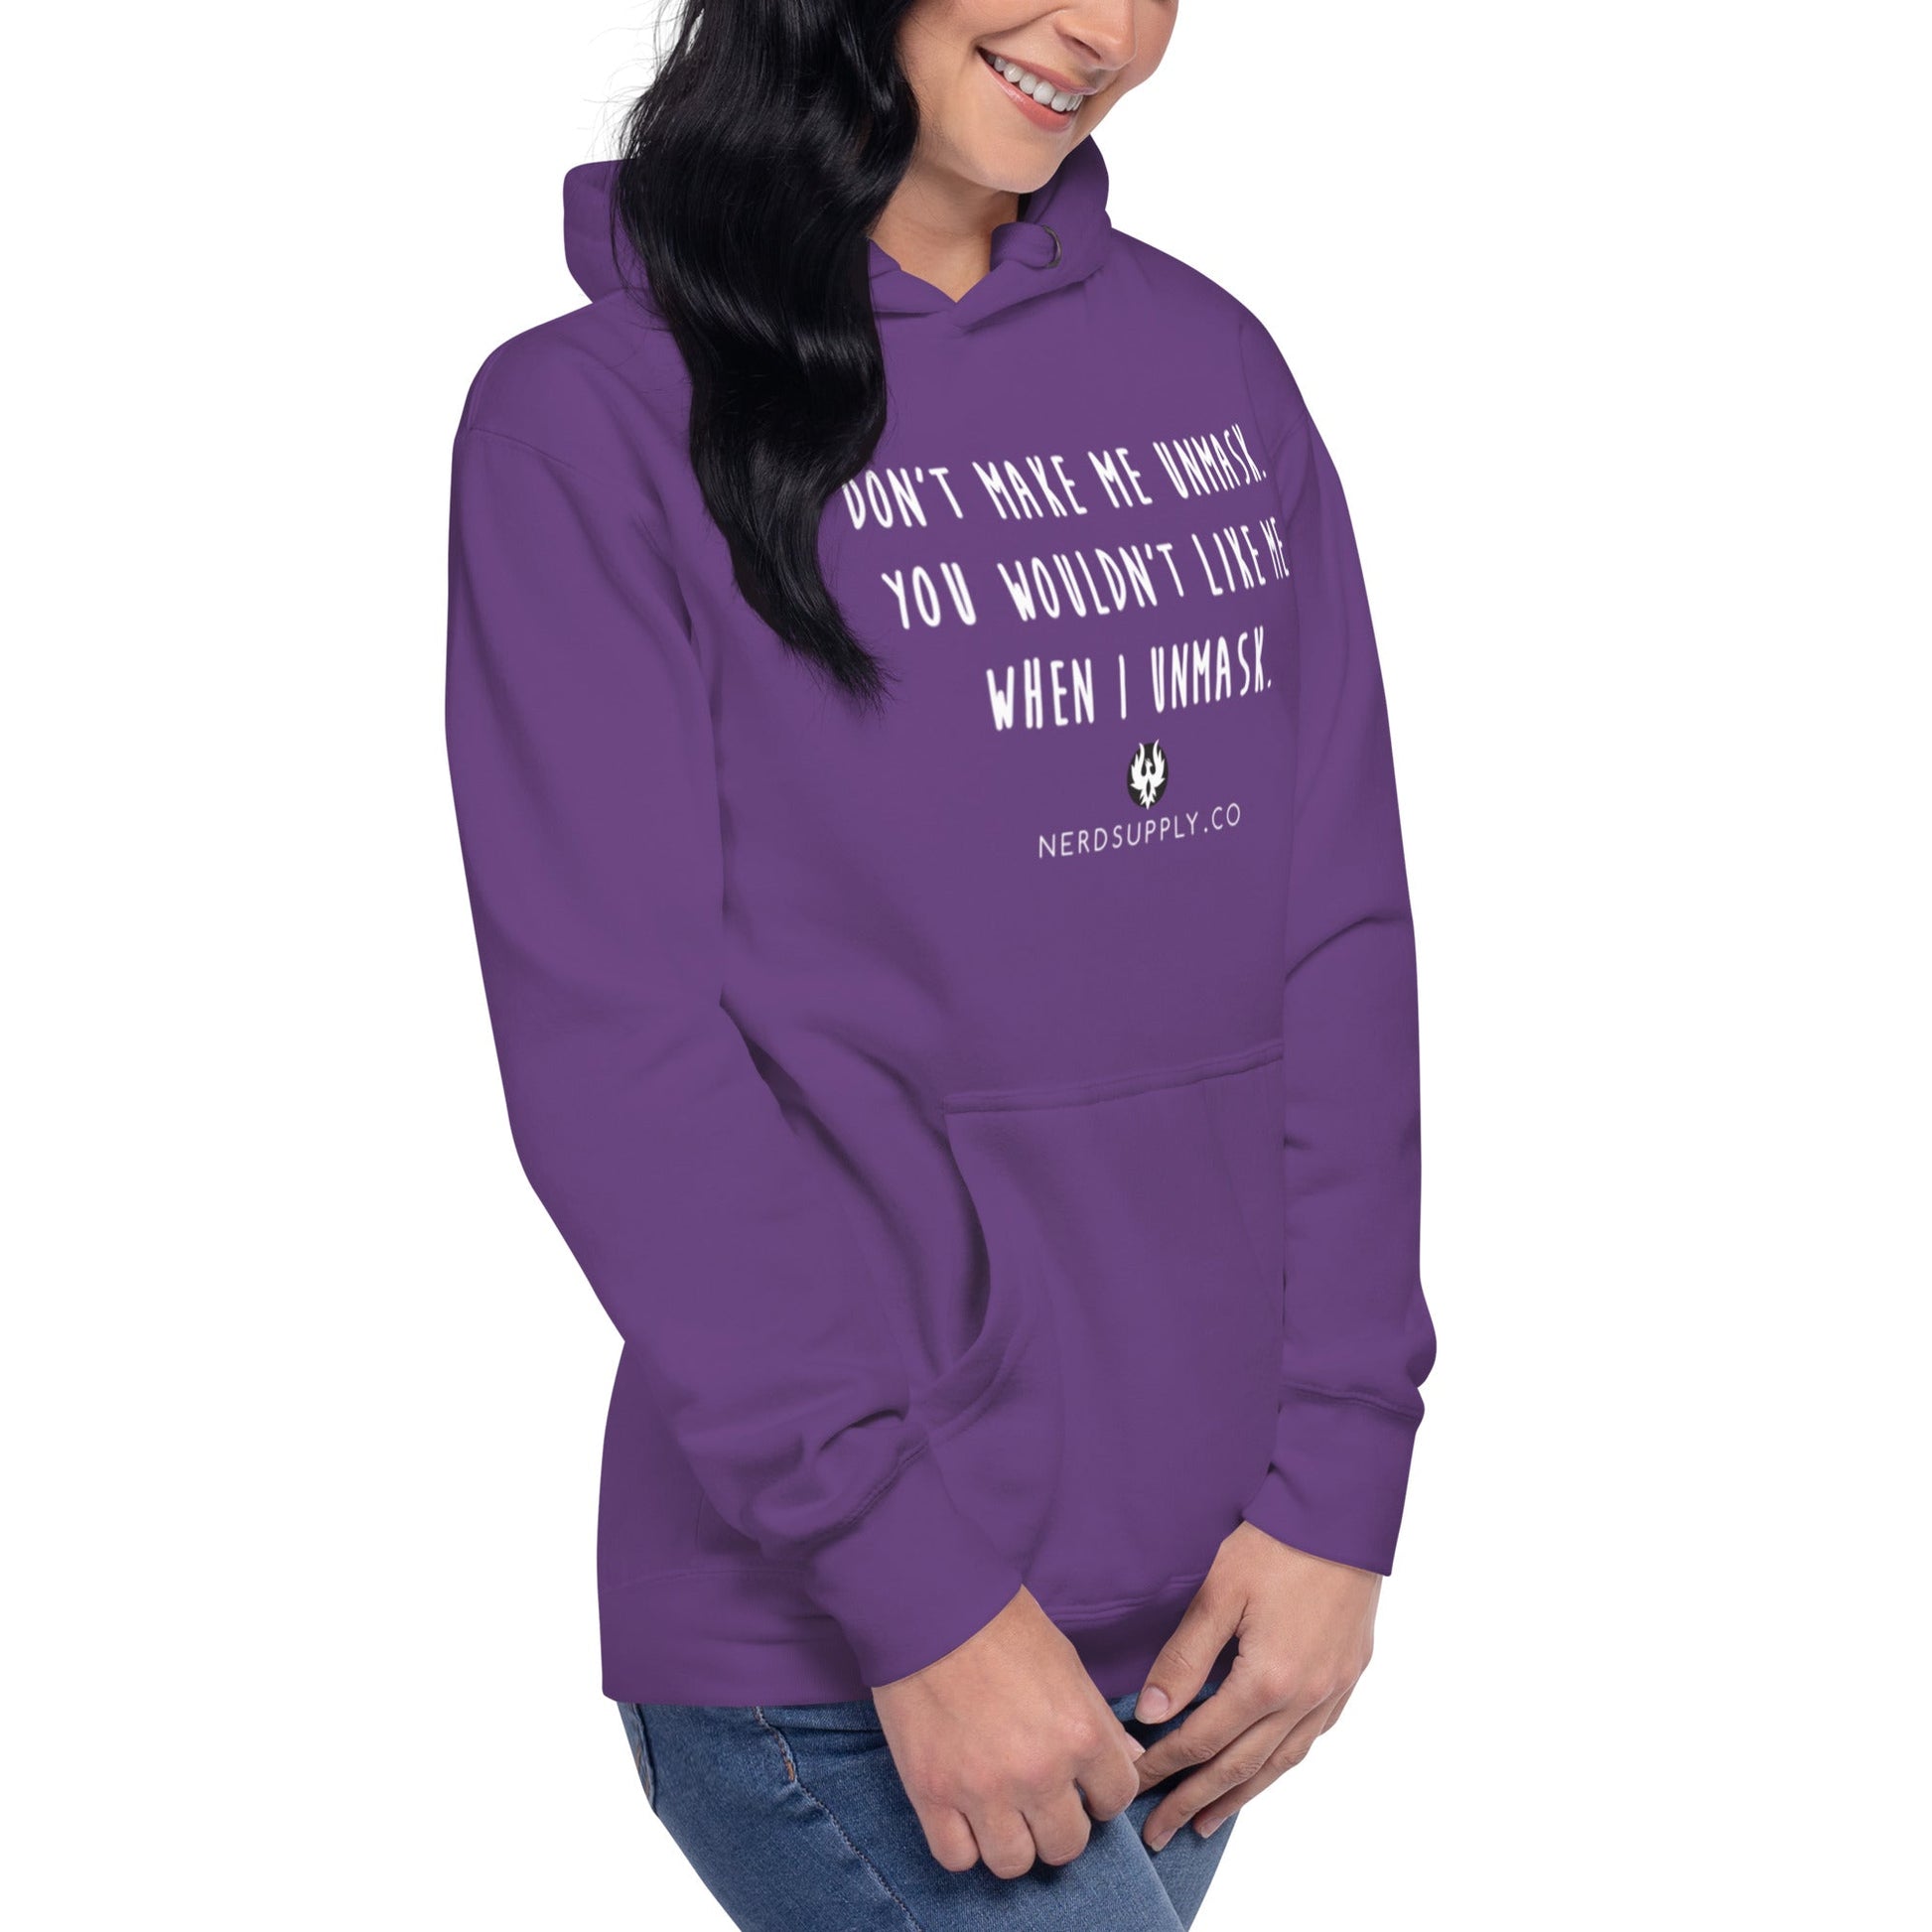 "Don't make me unmask" - Hoodie - The Nerd Supply Company